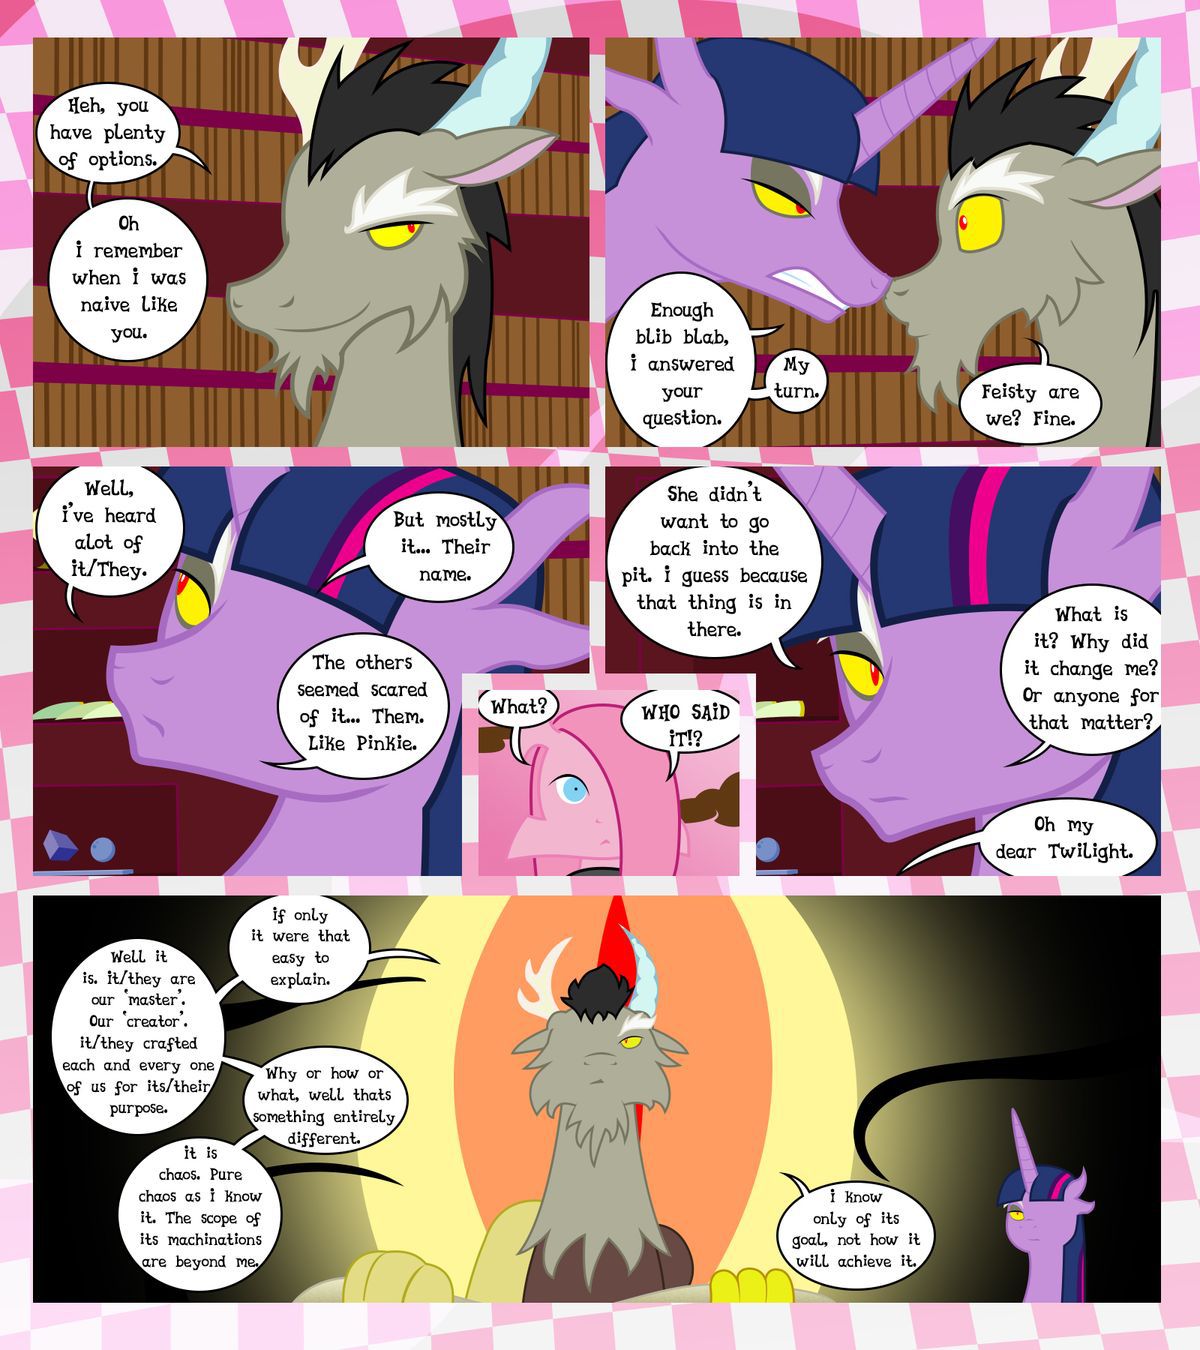 [GatesMcCloud] Cutie Mark Crusaders 10k: Chapter 3 - The Lost (My Little Pony: Friendship is Magic) [English] [Ongoing] 31